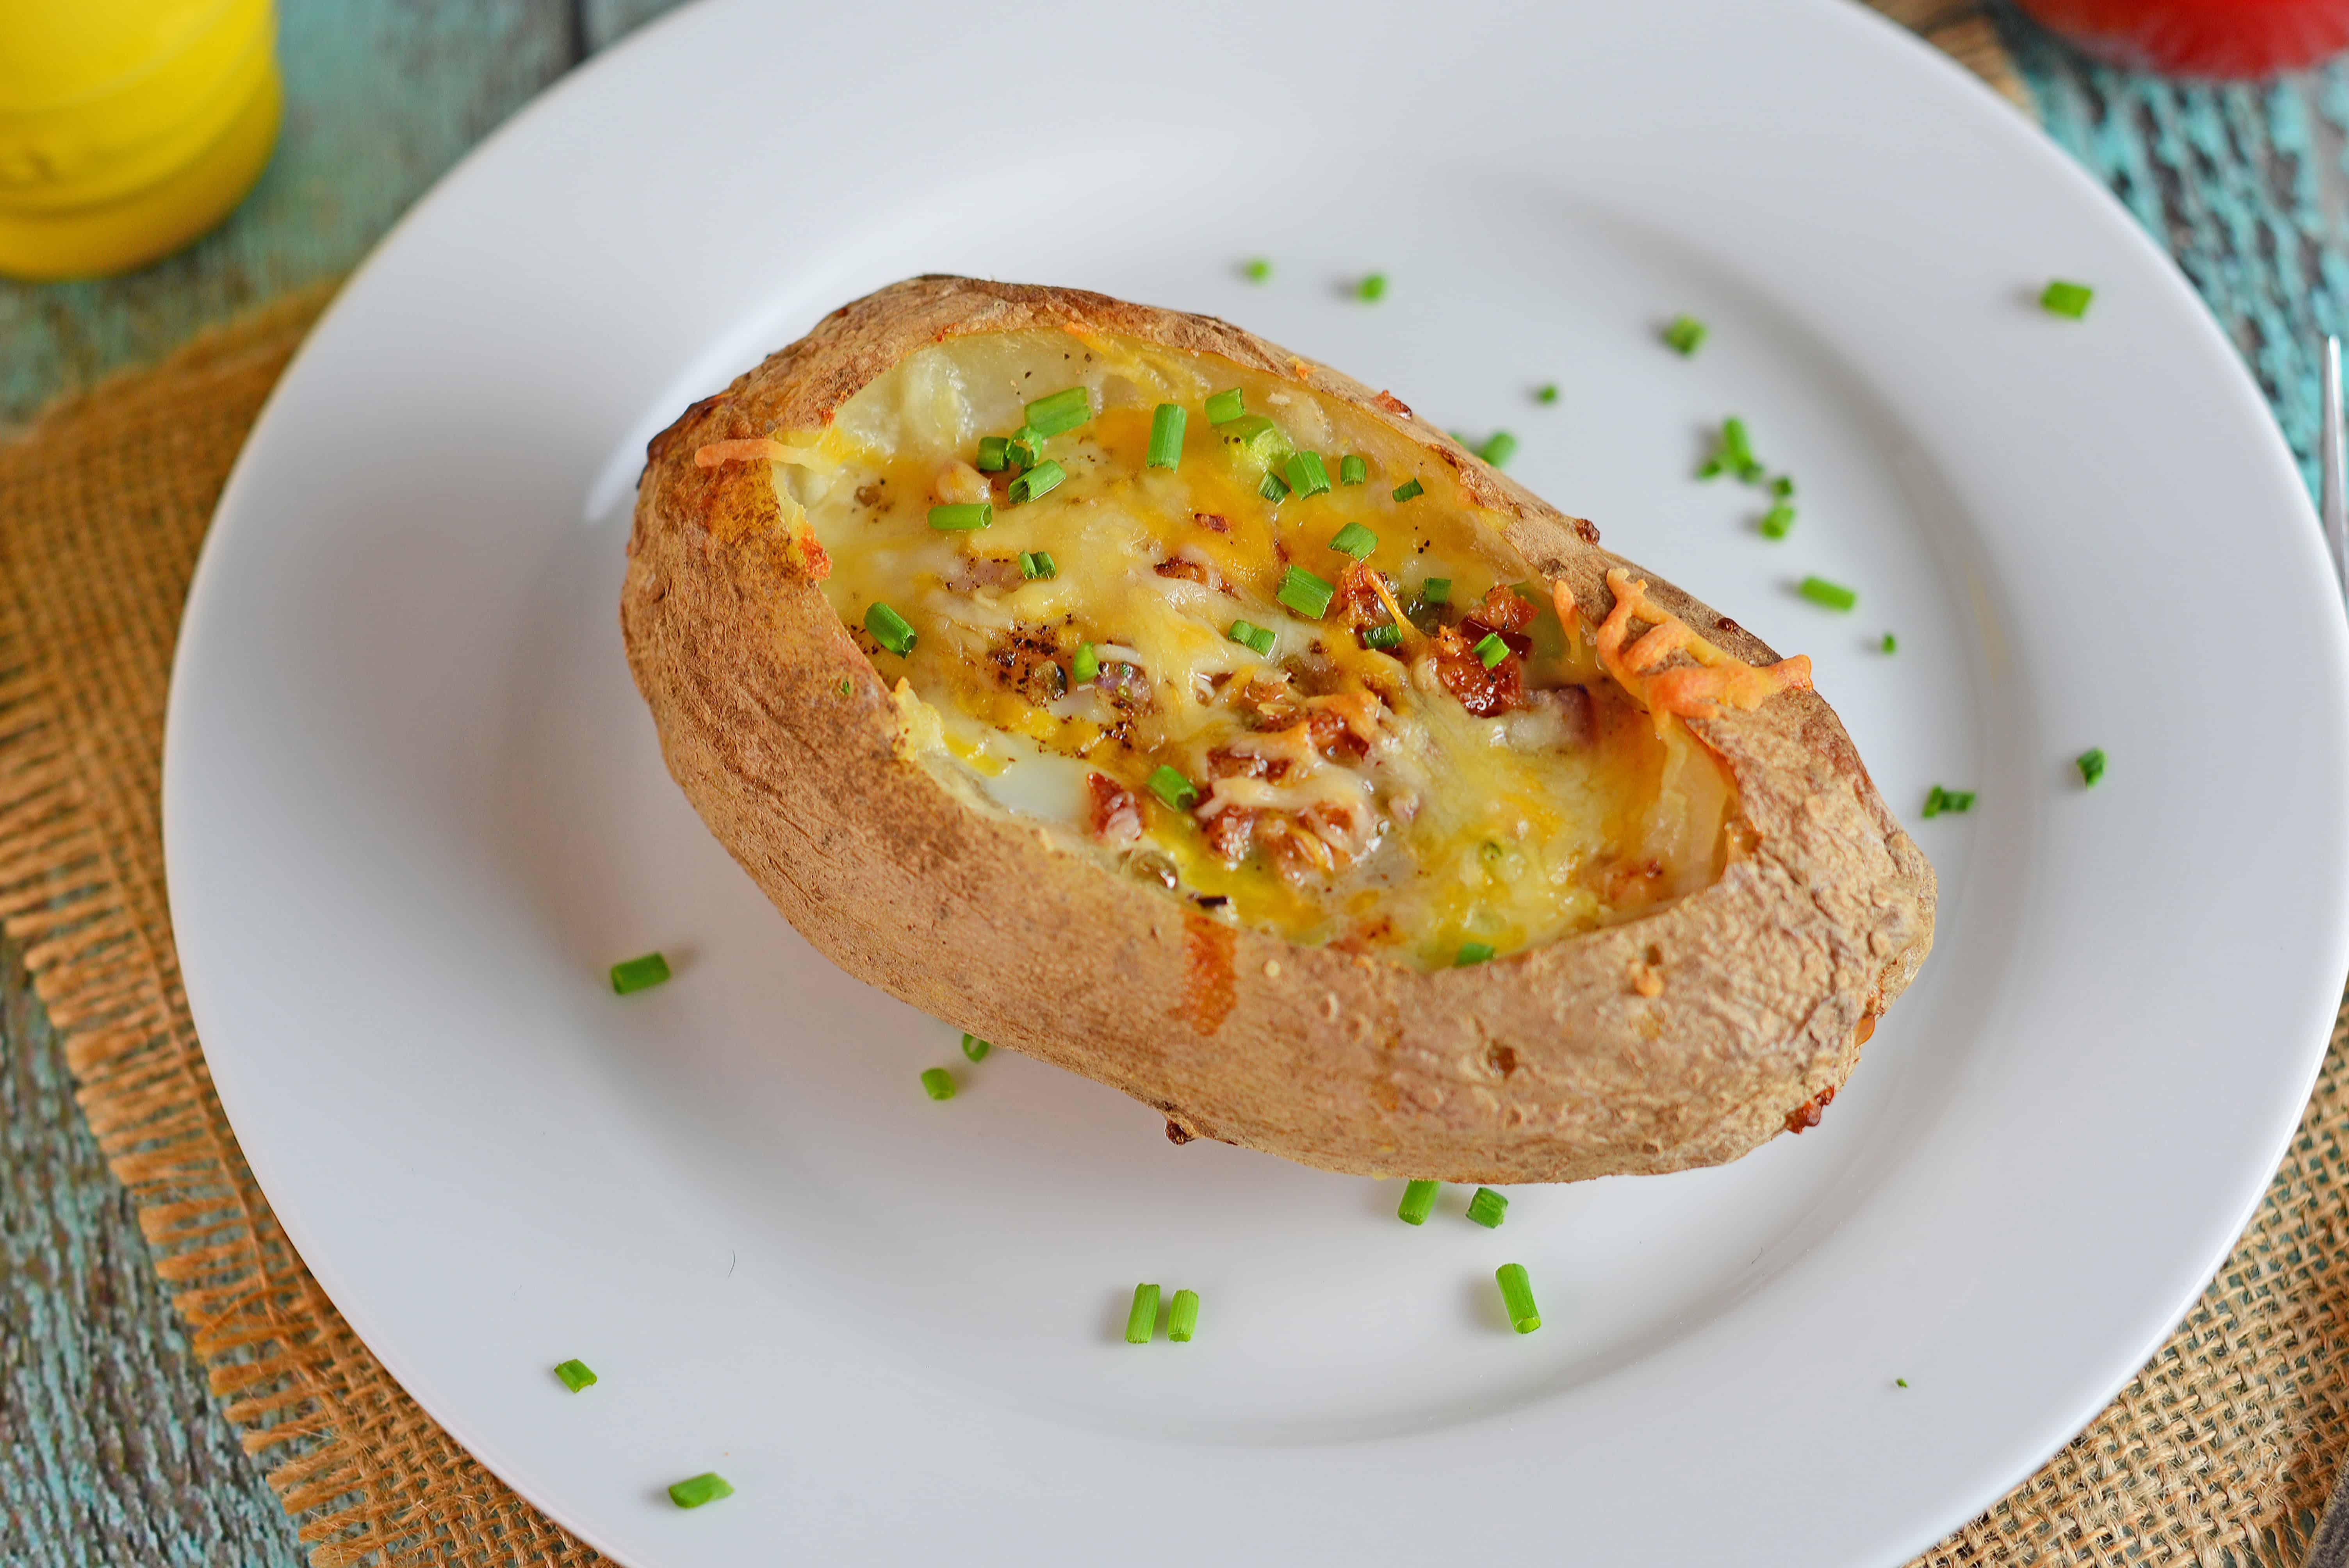 Stuffed Breakfast Potatoes are an easy one-dish breakfast solution perfect for feeding a group! Stuffed with cheese, your choice of veggies, bacon and an egg! #breakfastpotatoes #stuffedbakedpotatoes www.savoryexperiments.com